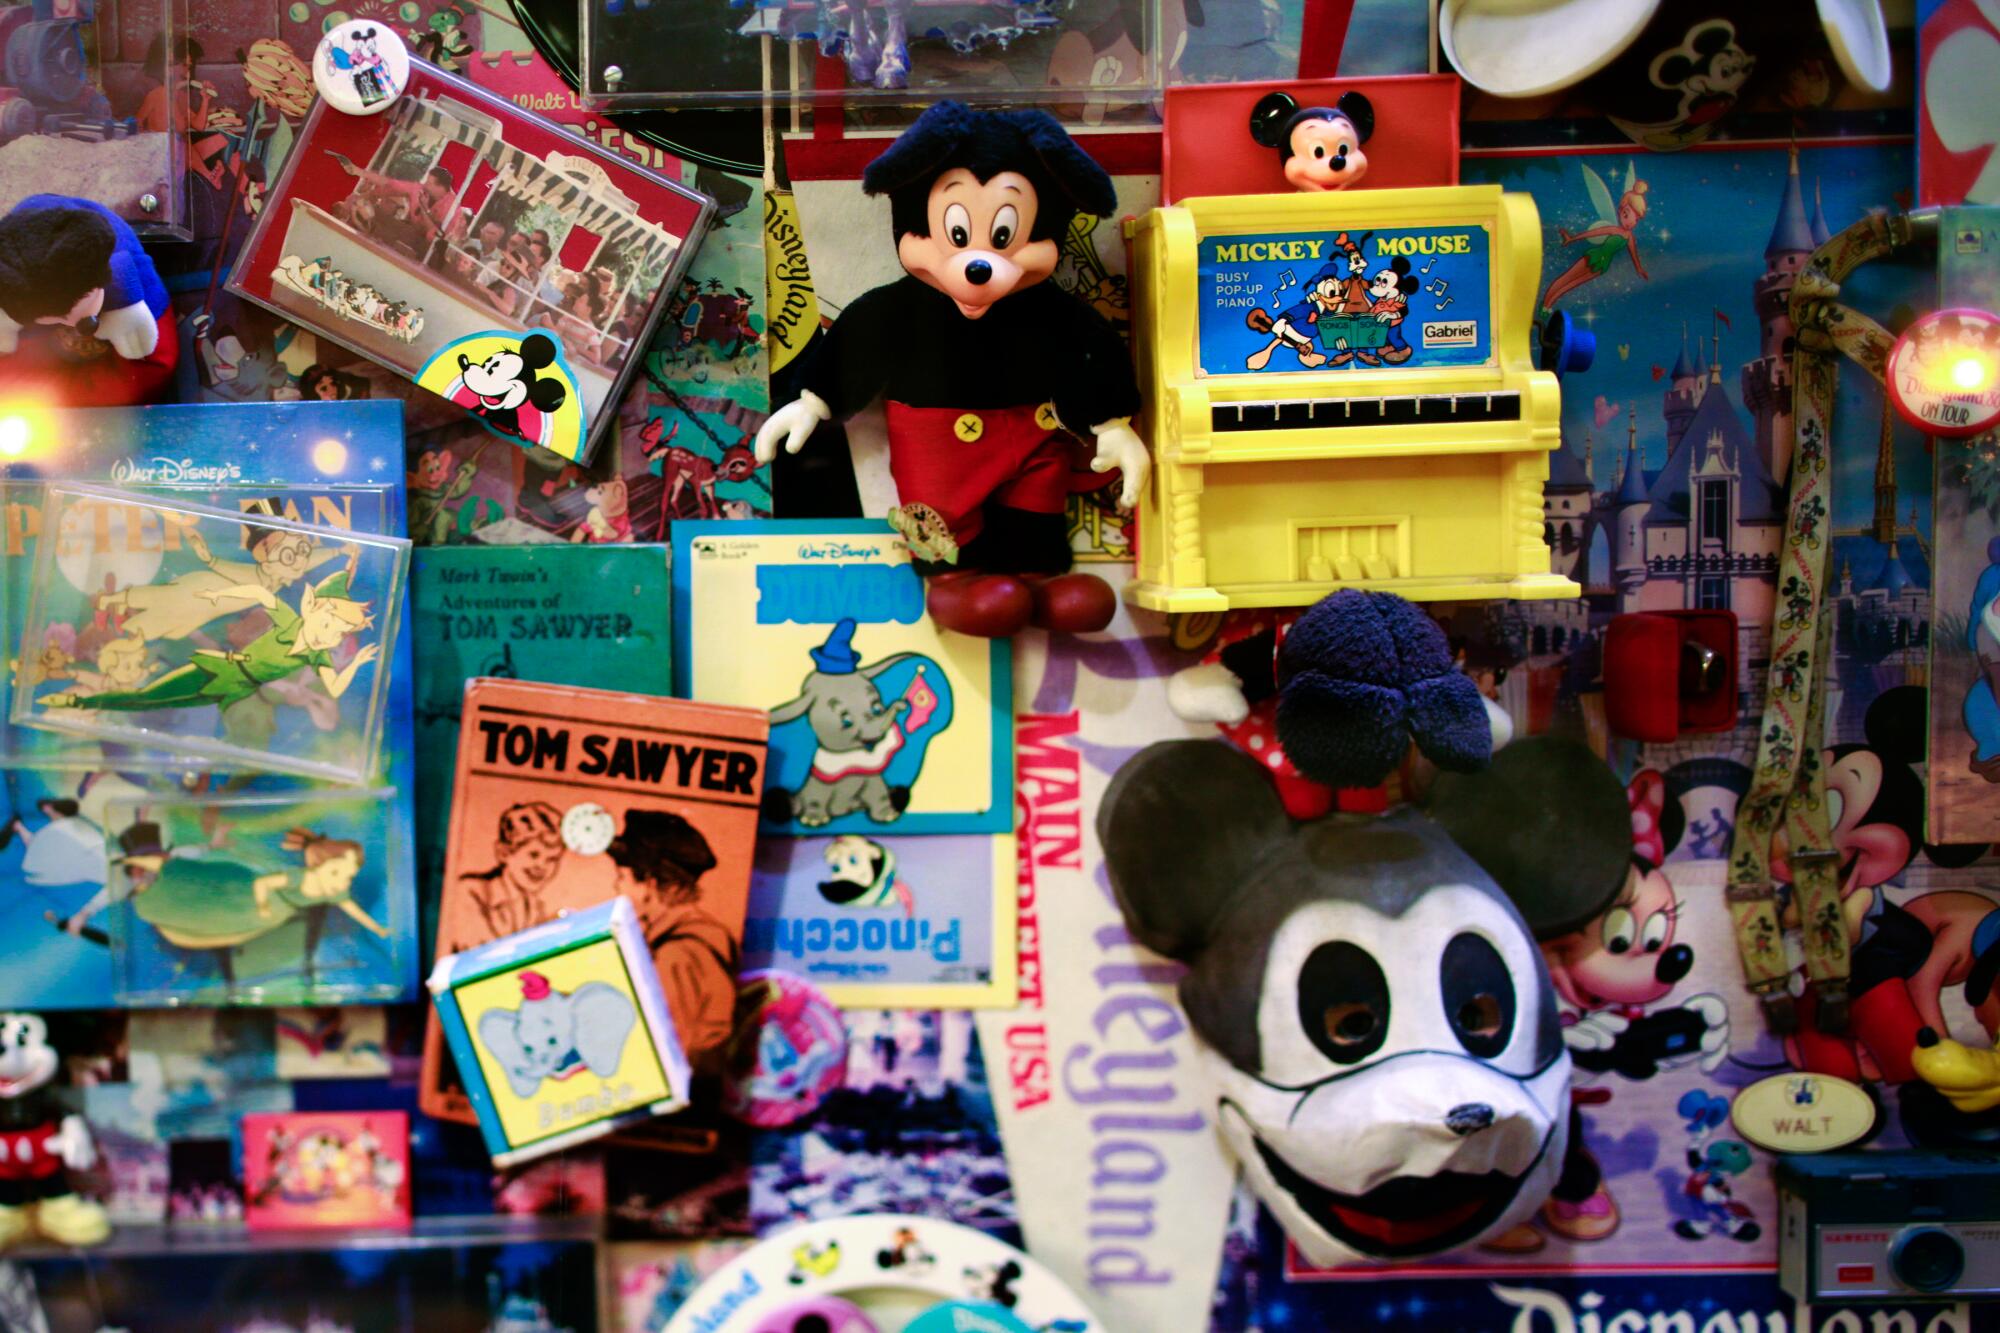 Souvenirs bear images of Mickey Mouse, Dumbo, Peter Pan, Tom Sawyer and others.